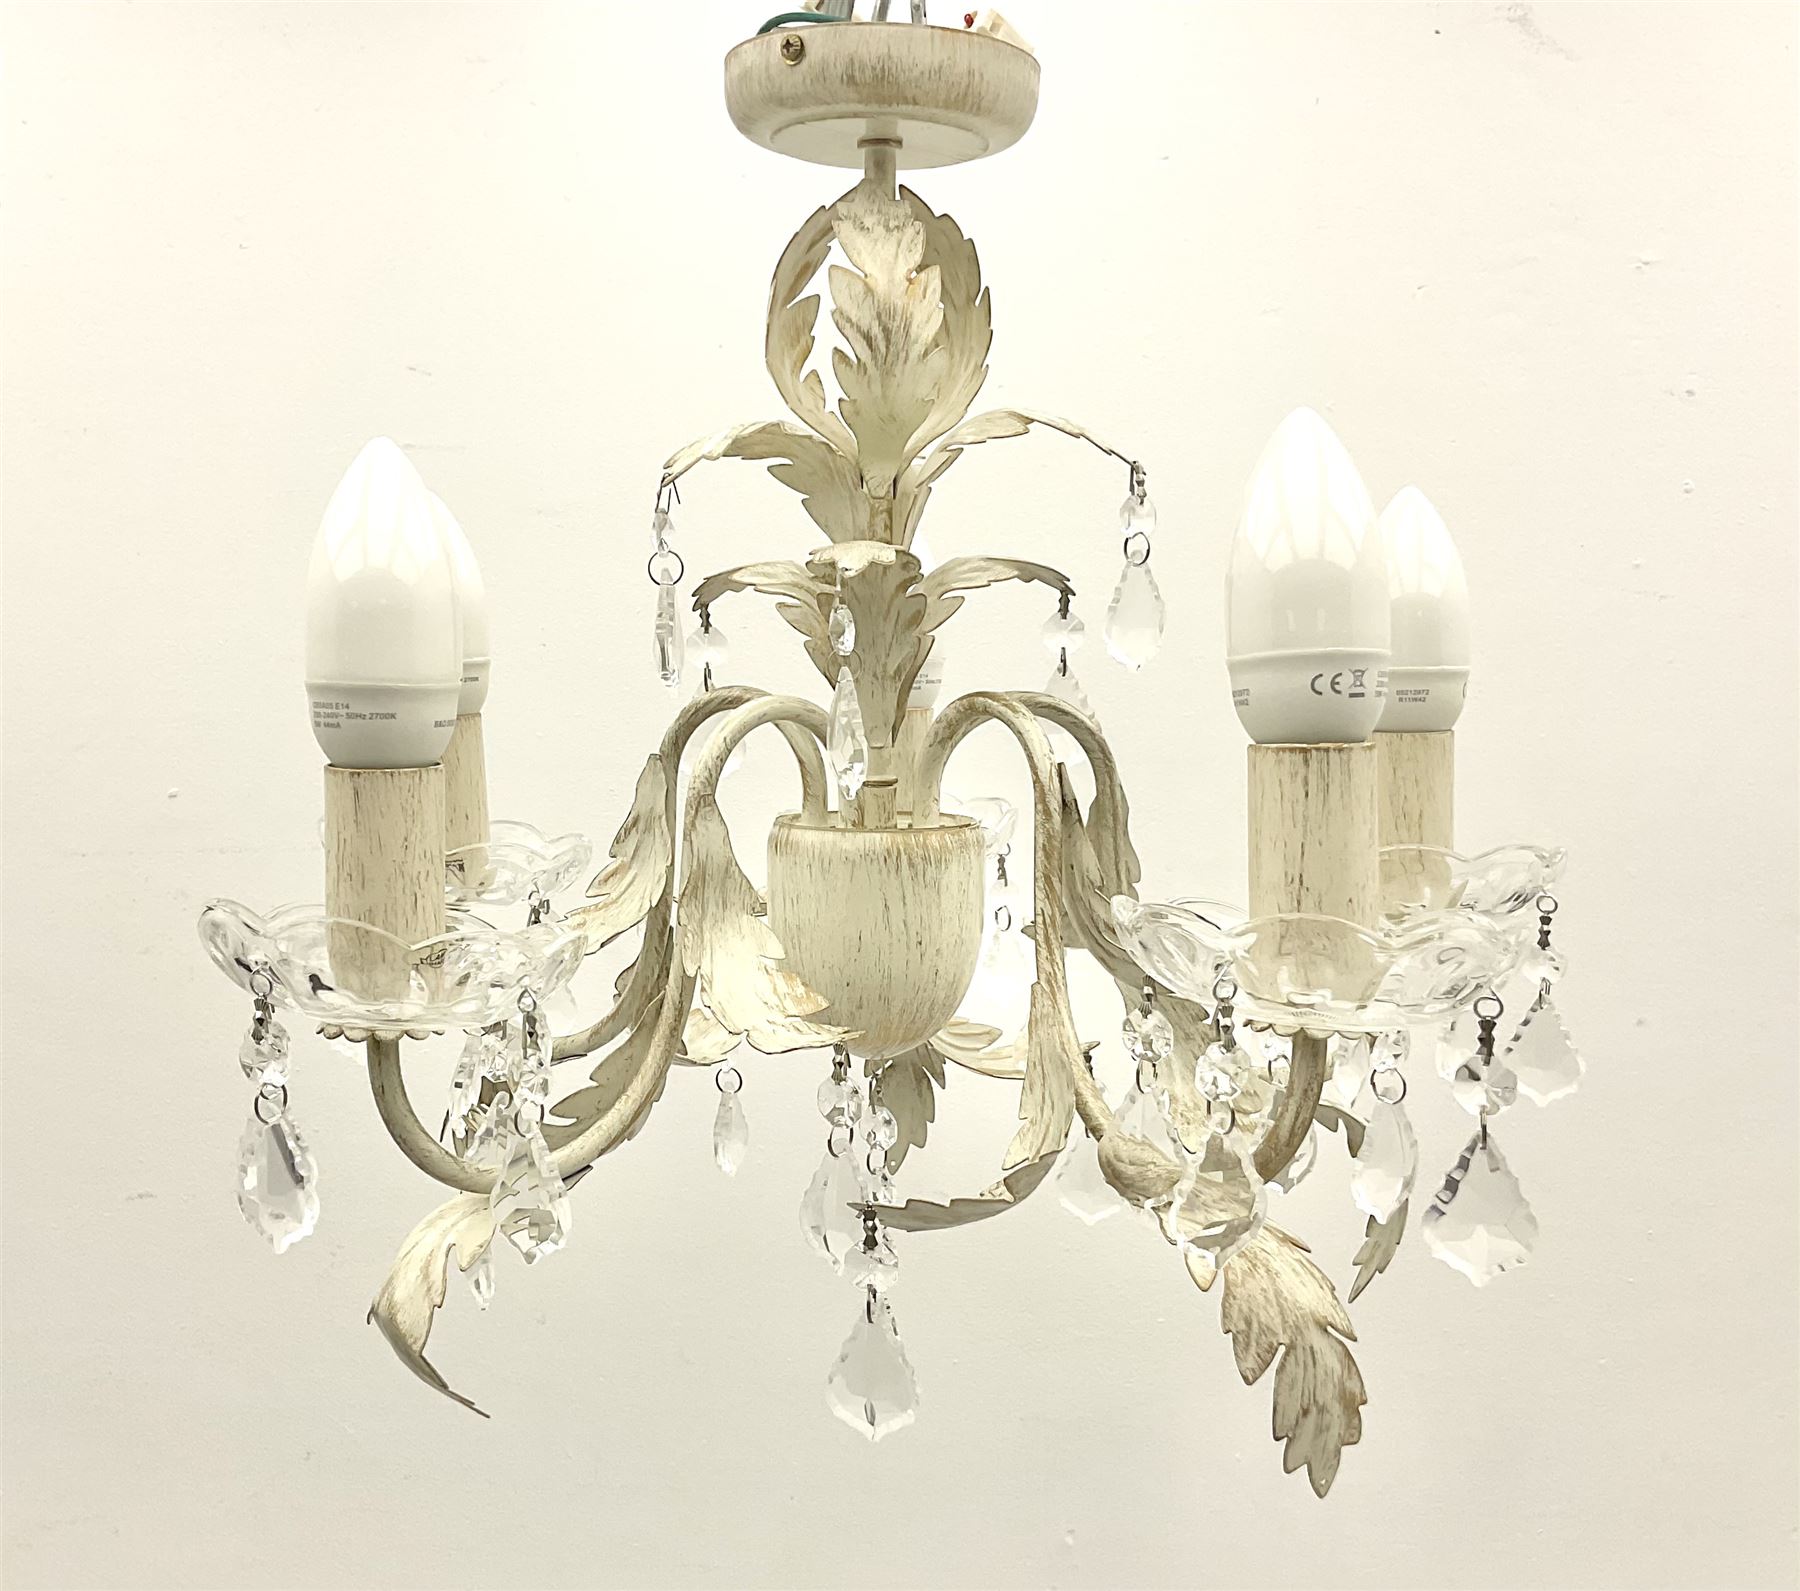 Single five branched chandelier with leaf and droplets detail H39cm